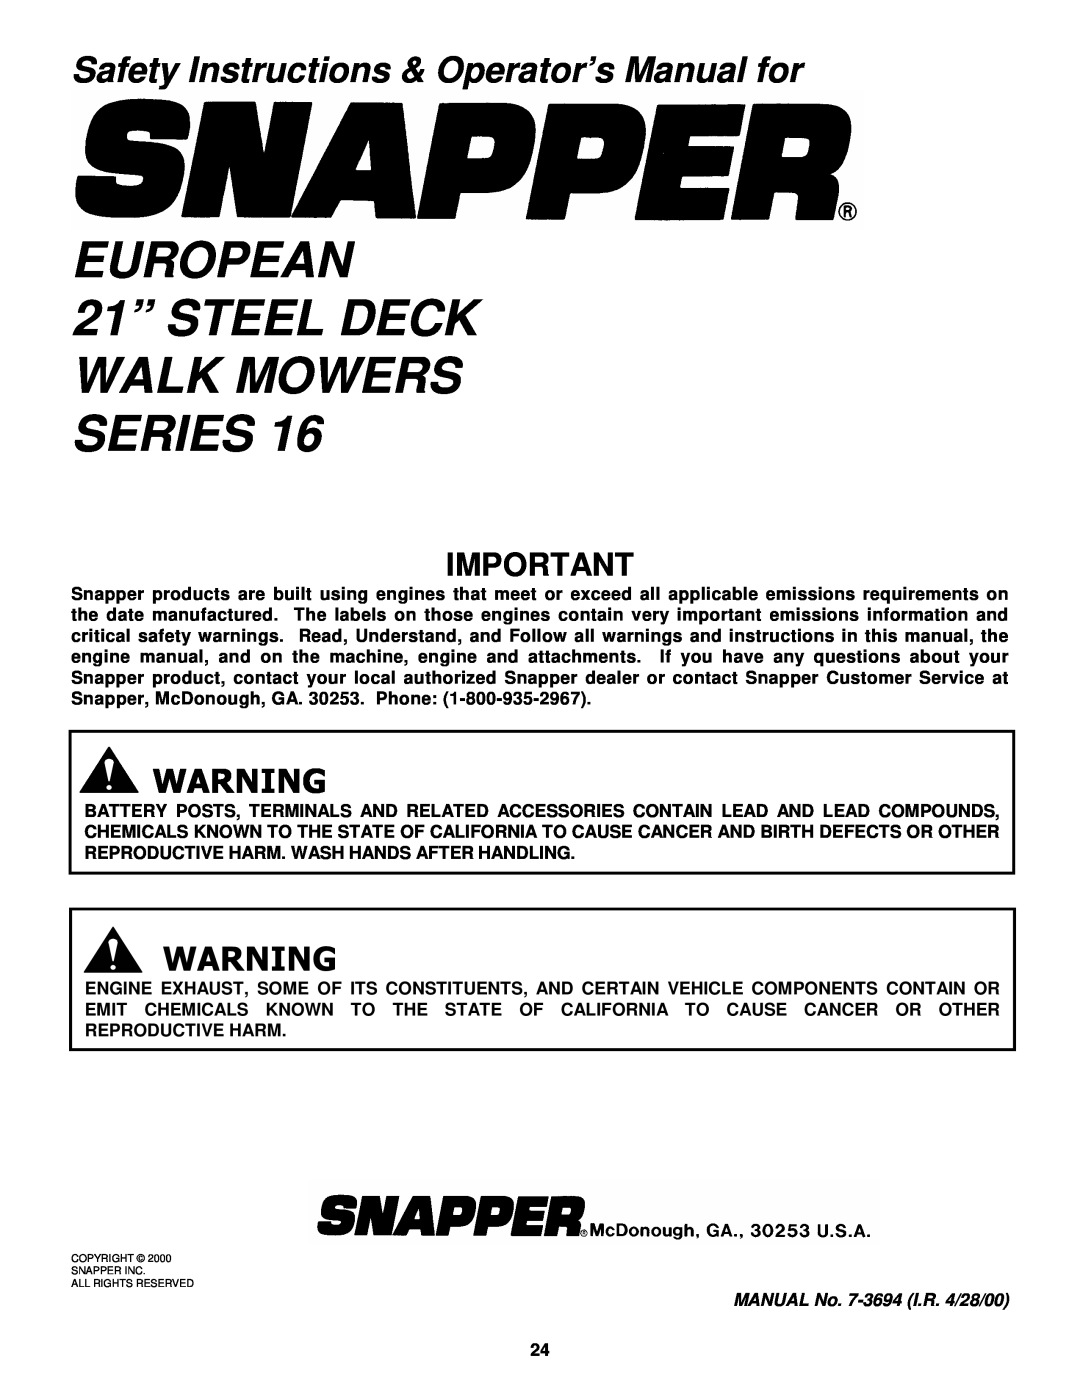 Snapper EFRP216516BV EUROPEAN 21” STEEL DECK WALK MOWERS SERIES, Safety Instructions & Operator’s Manual for 